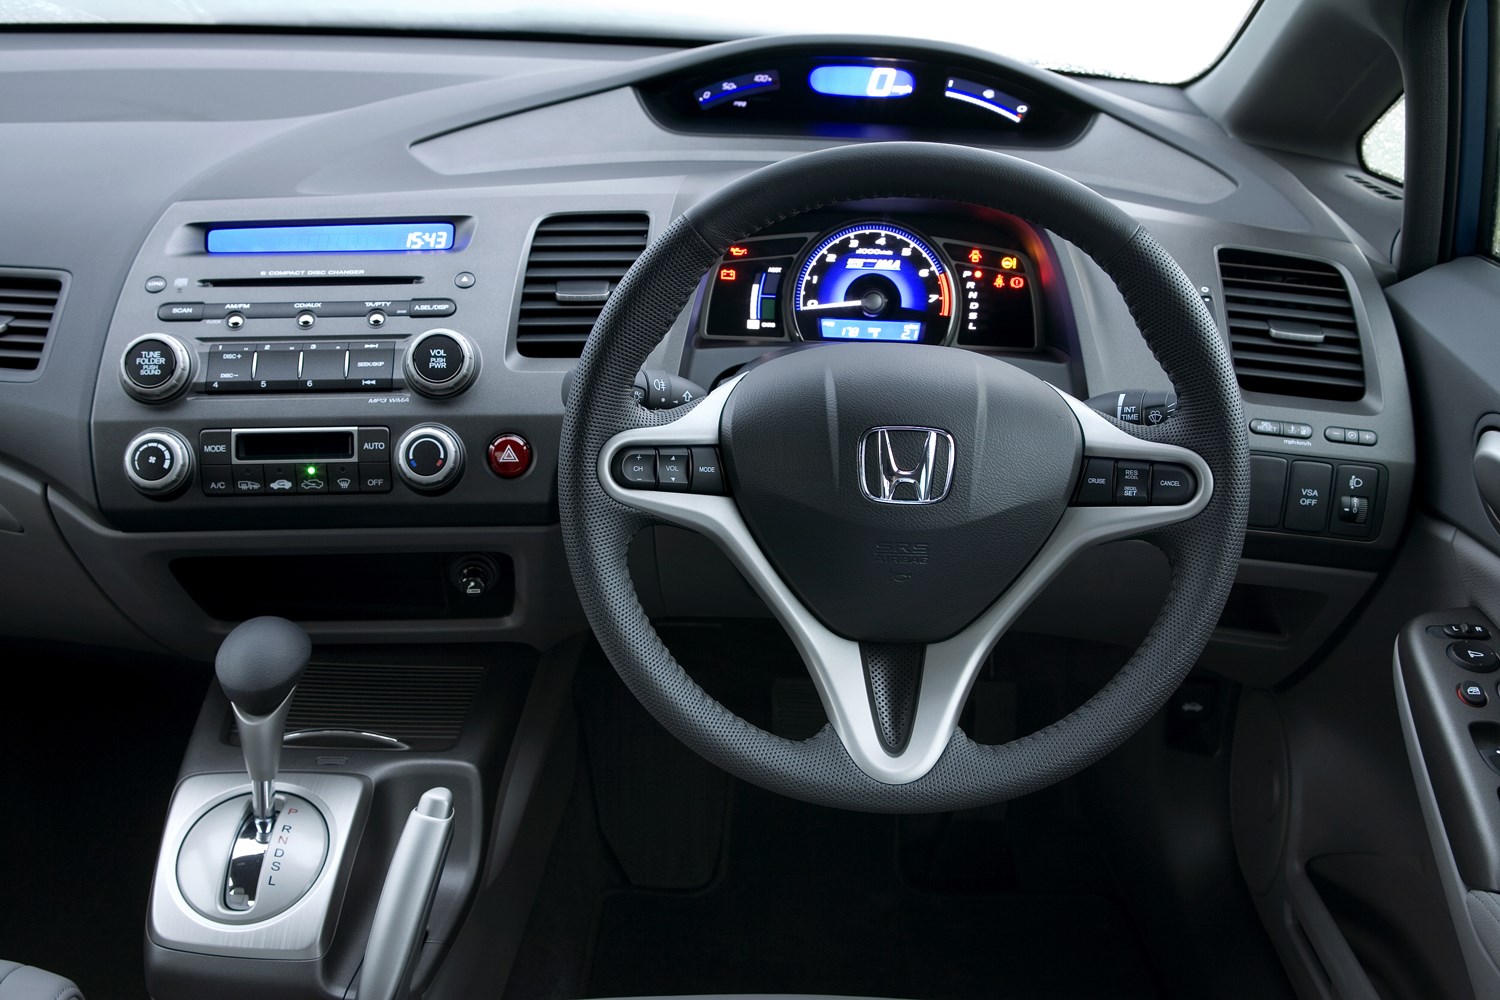 Used Honda Civic Hybrid Saloon 2006 2010 Review Parkers